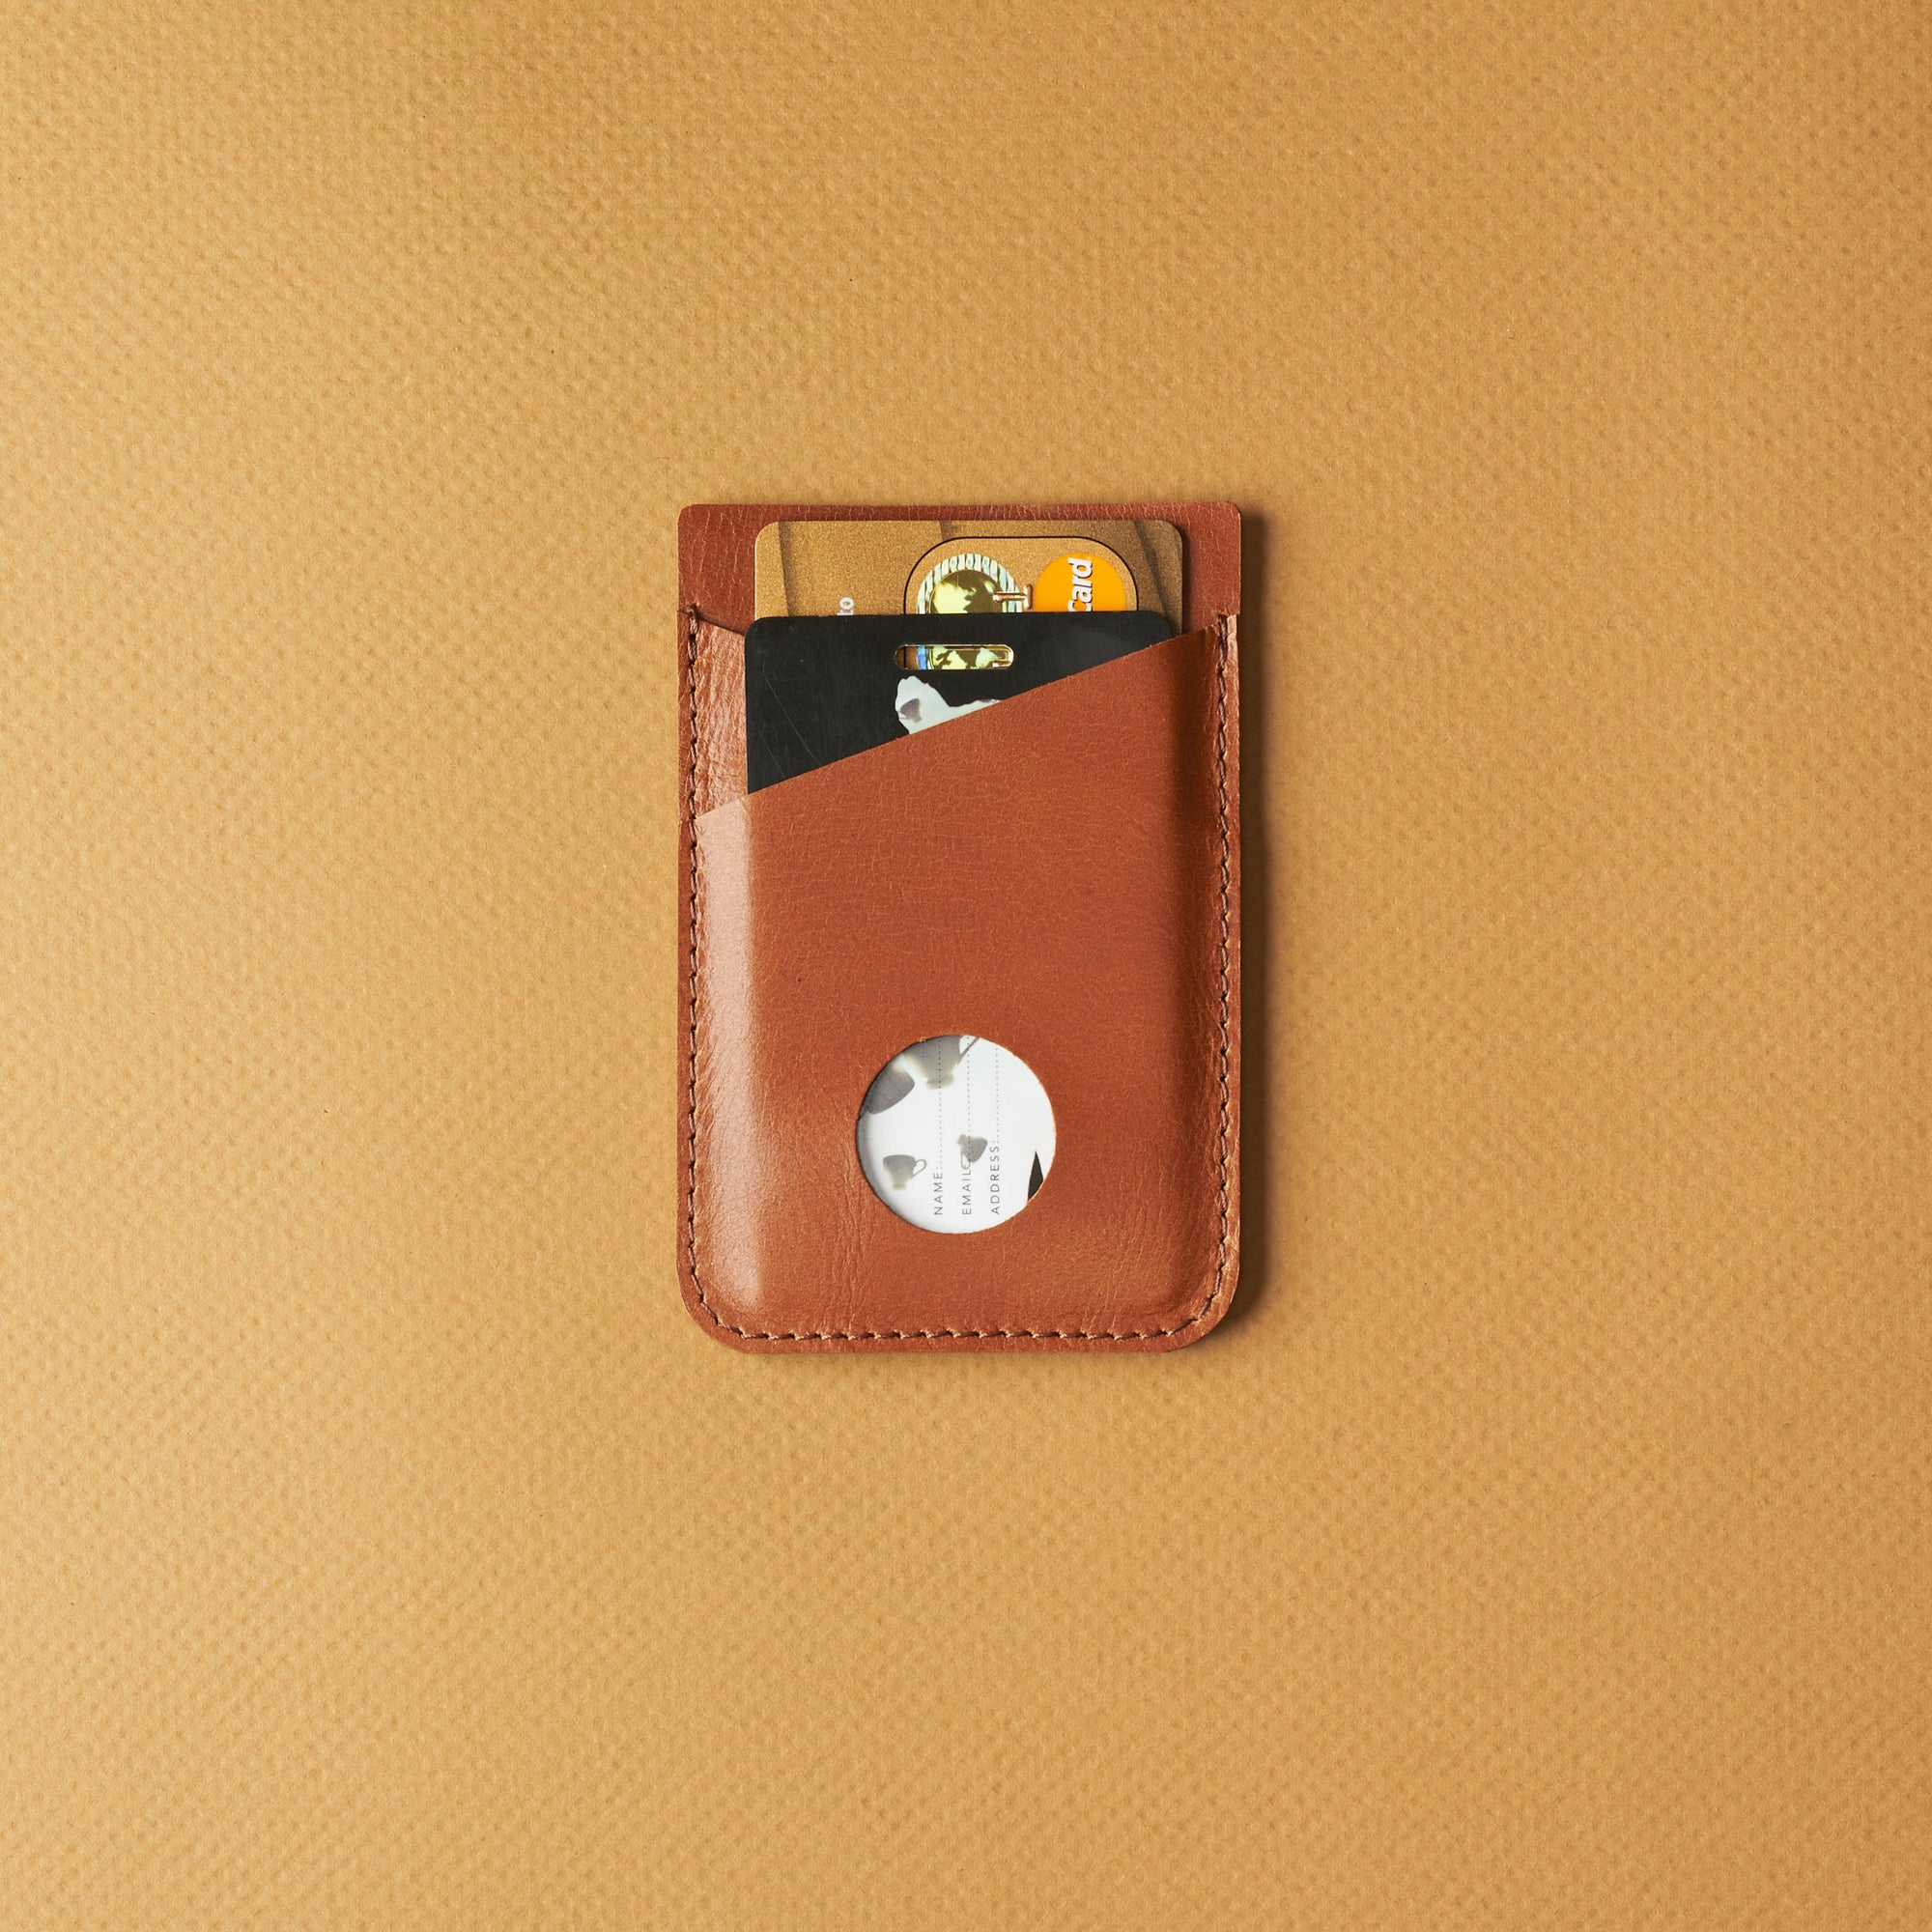 With cards. Small Gear Travel Pouch 2 Tan by Capra Leather